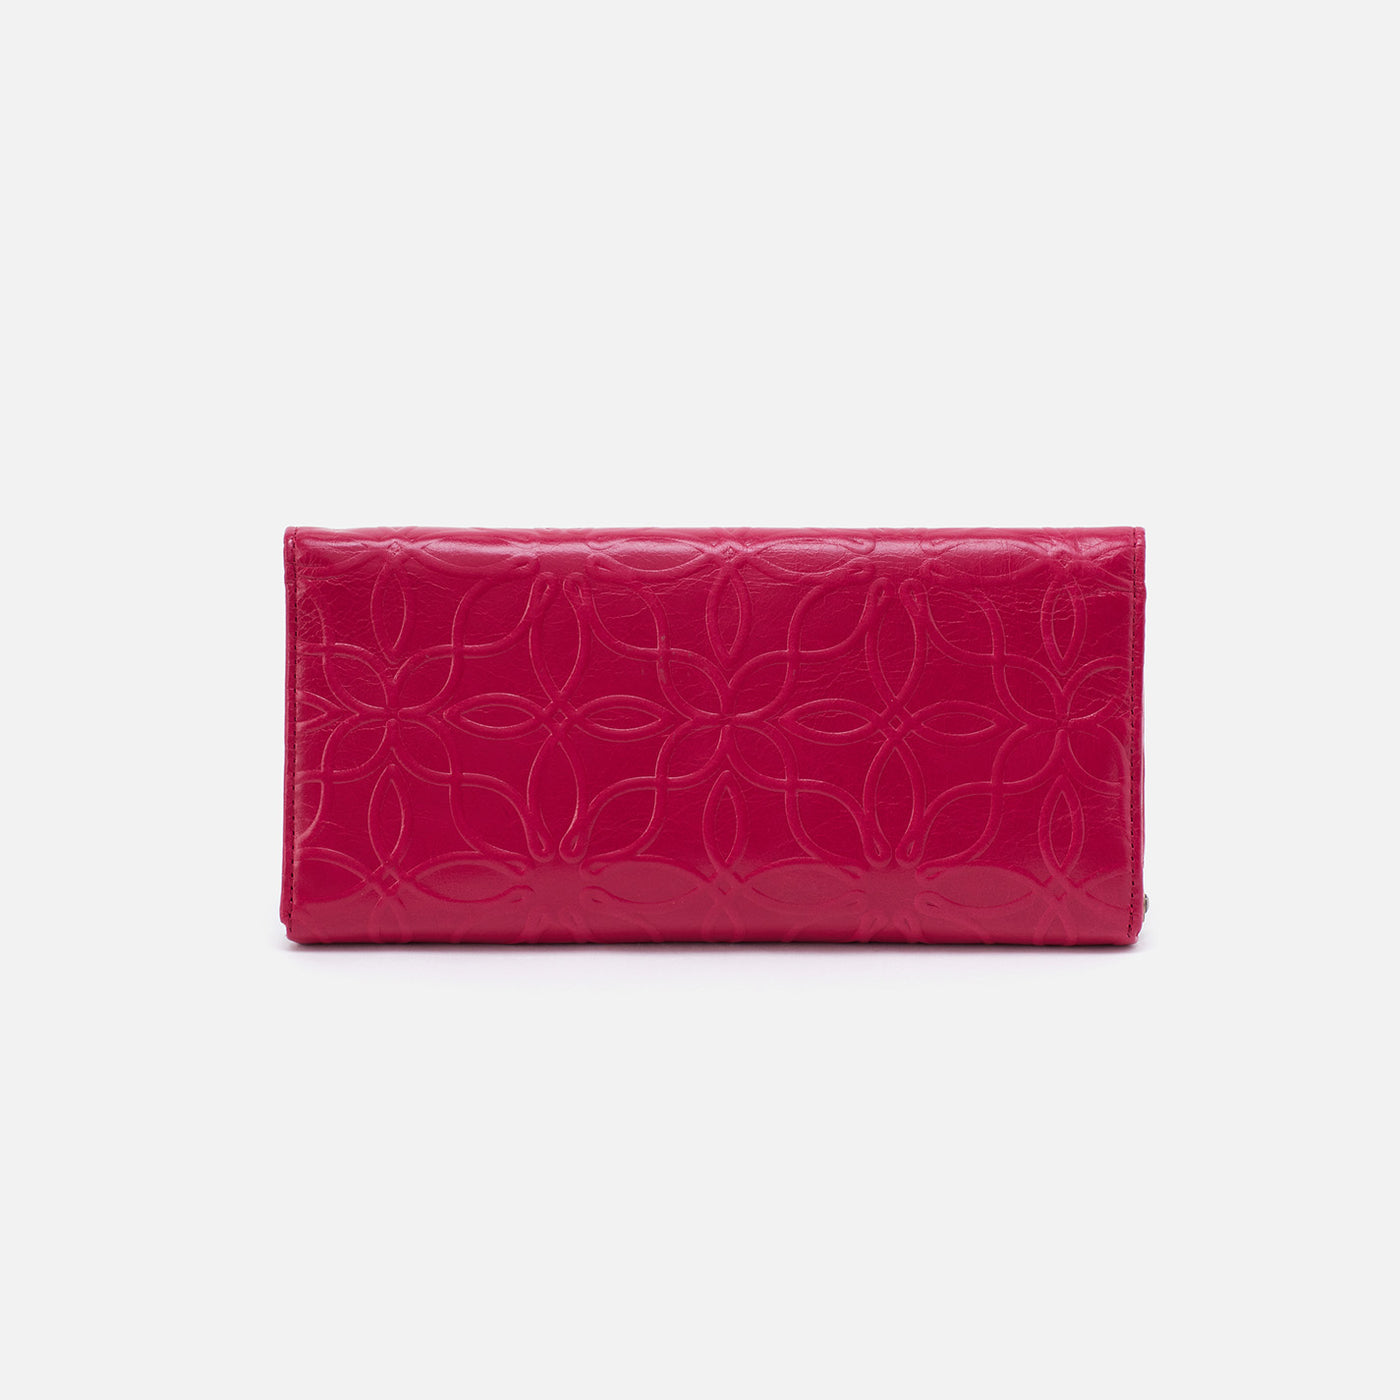 Rachel Debossed Continental Wallet in Polished Leather - Fuchsia